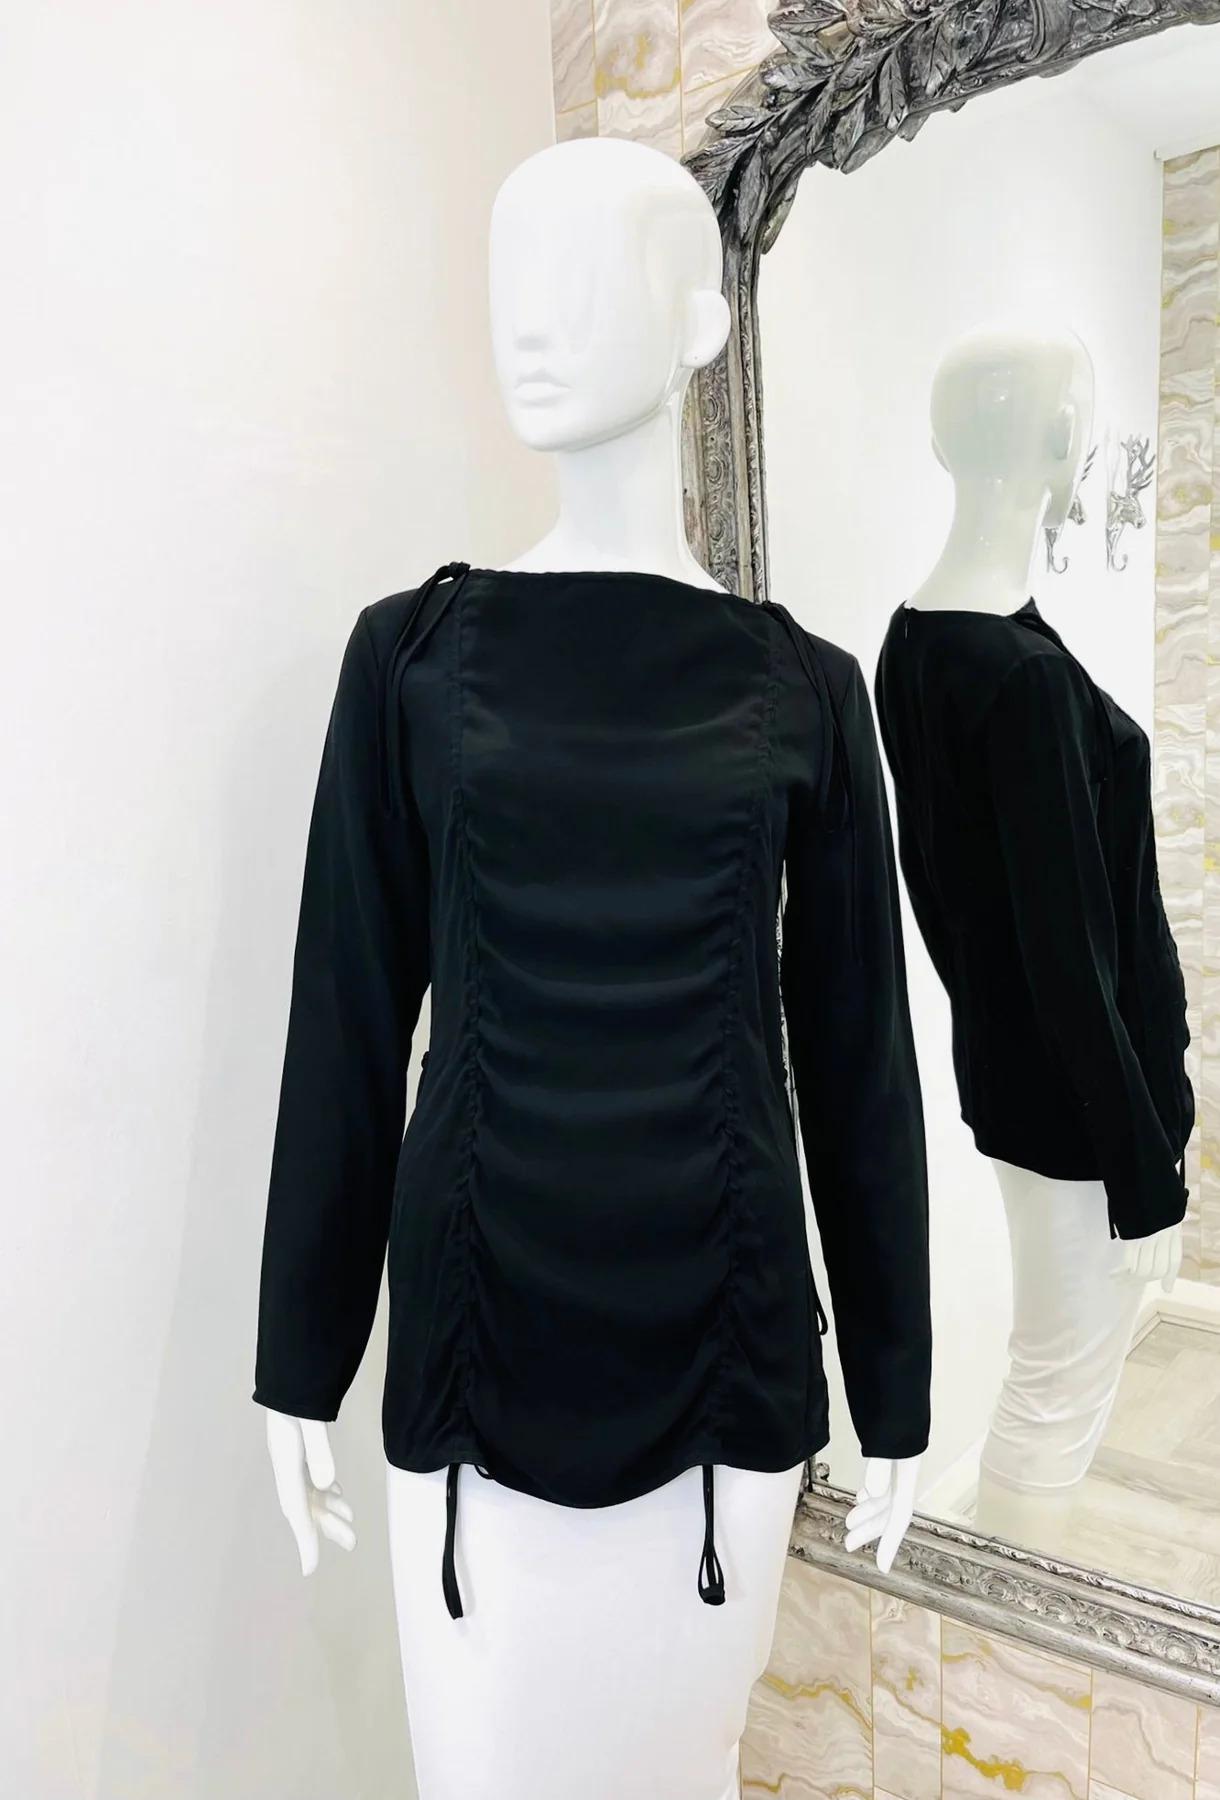 Marni Ruched Top

Black top with long sleeves, ruching and self tie detailing.

Additional information:
Size – 38IT
Composition – 58% Viscose, 42% Acetate
Condition – Very Good